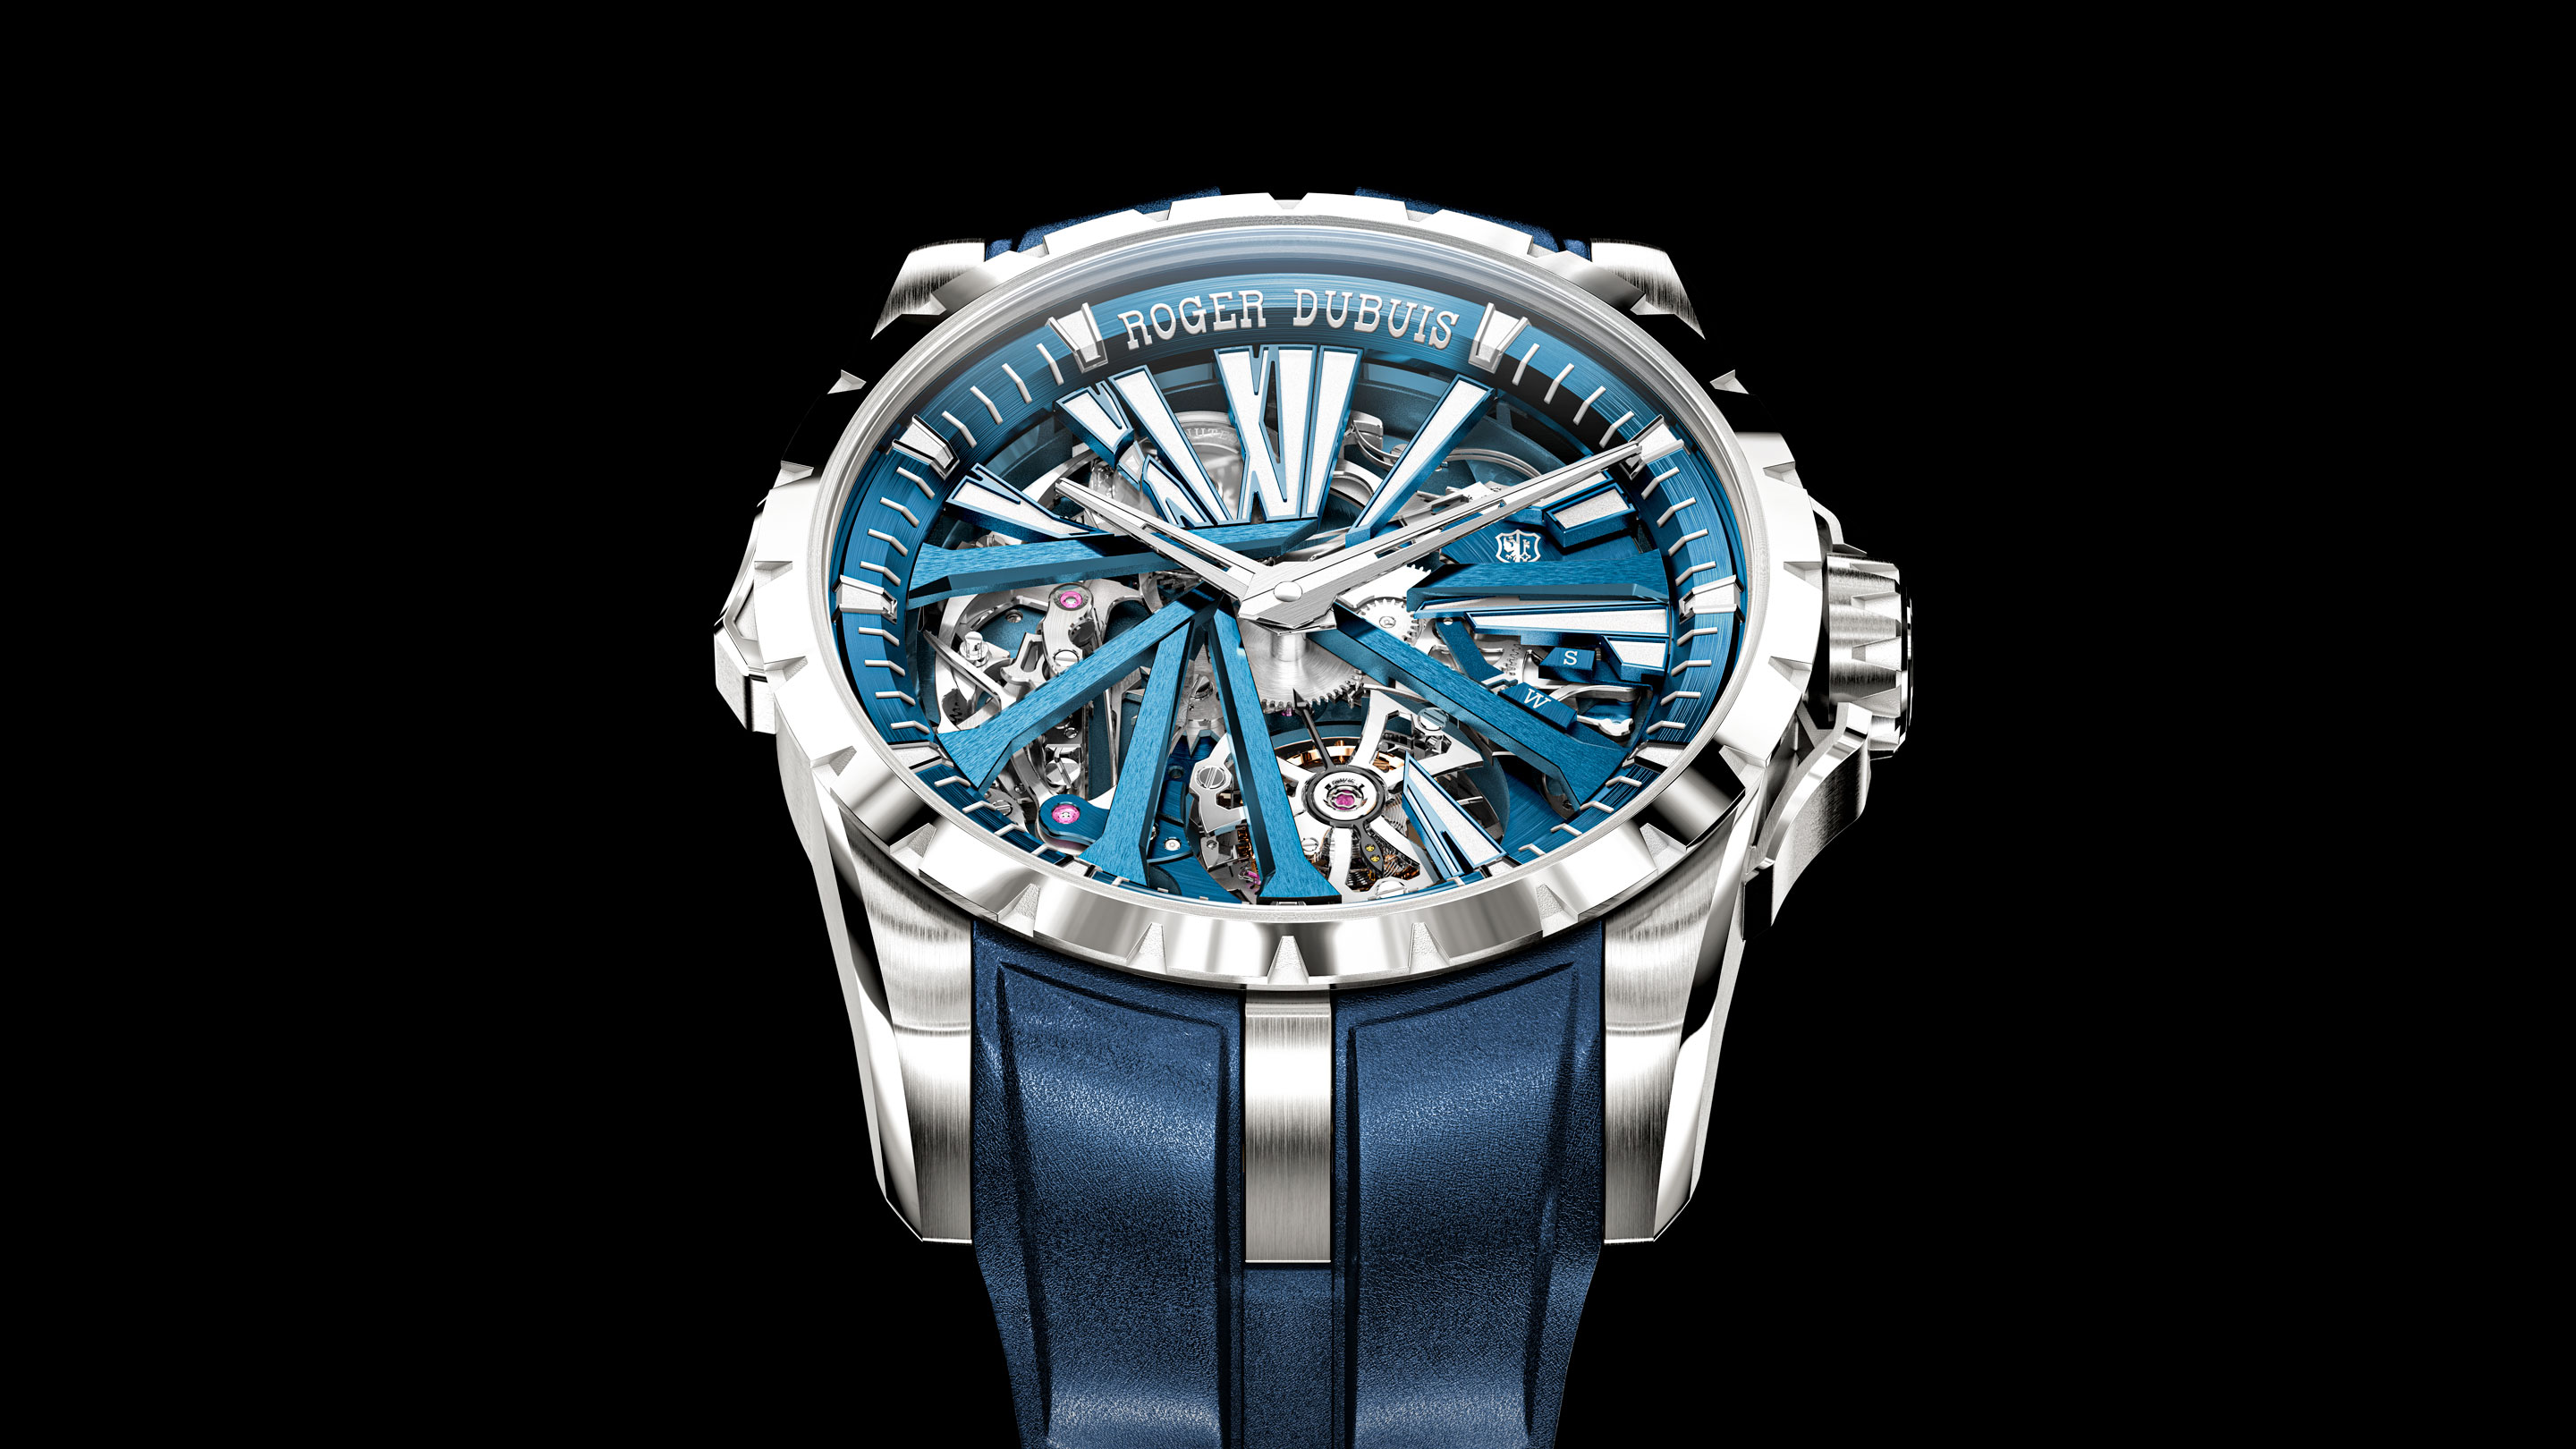 Excalibur 46 46mm Automatic Dual Time Zone Watch With Skeleton Dial, Blue  Inner Rose Gold Case, And Rubber Strap RDDBEX0256/DBX0668 Sport Watch  HWRD9234544 From Db7g, $159.41 | DHgate.Com